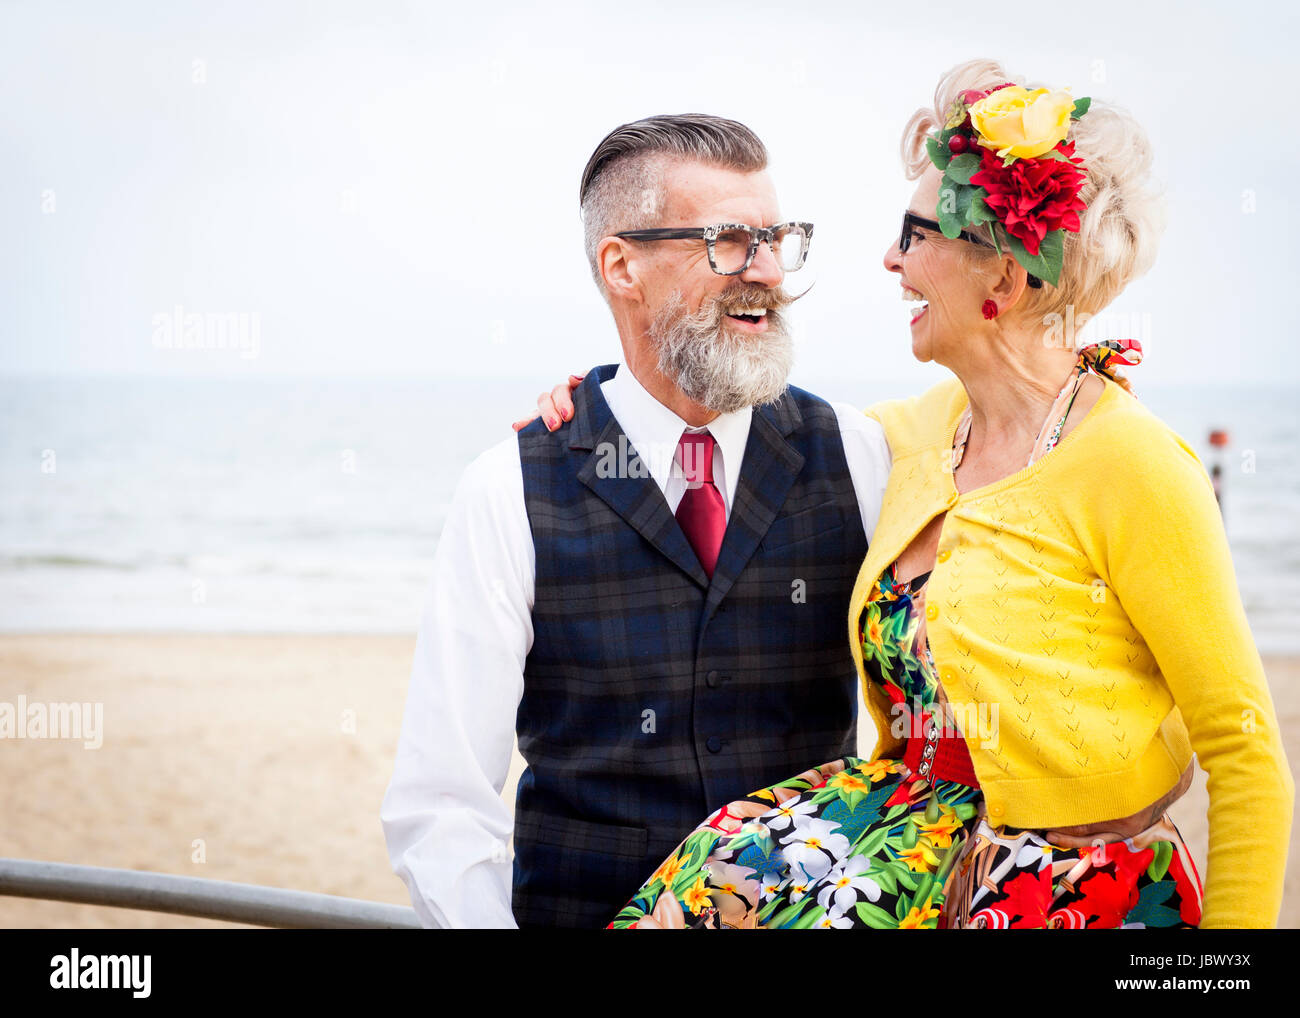 Années 50 vintage style couple laughing at beach Banque D'Images